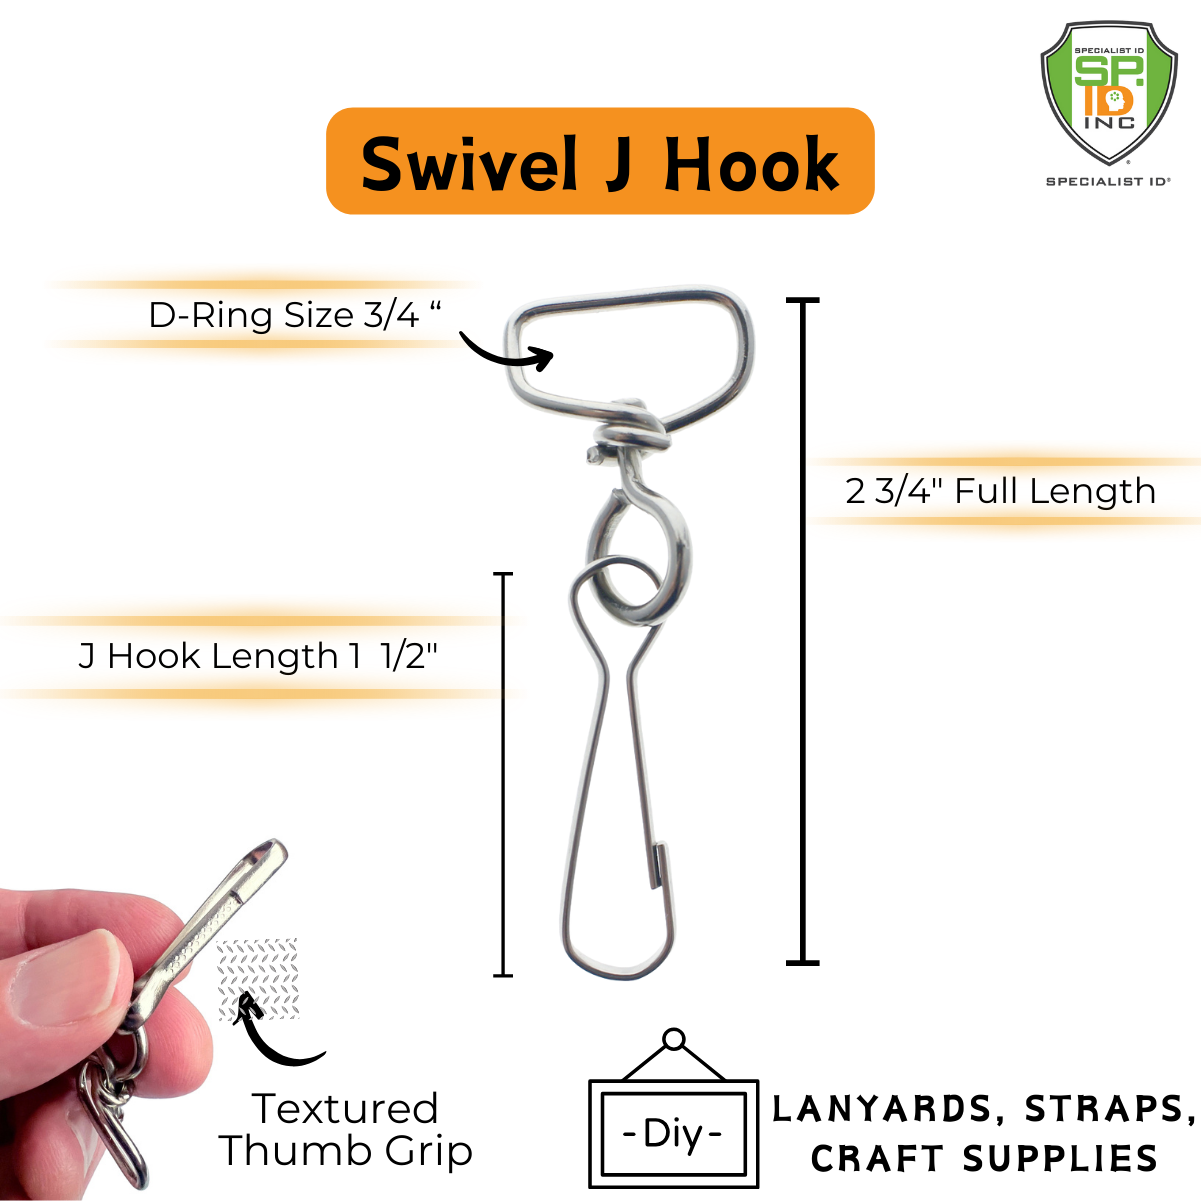 Image showing a Premium Swivel J Clip Clasp with Wide, Smooth Rounded 3/4 Inch D Ring - DIY Lanyard and Craft Accessories (6905-M-289) with labeled dimensions: D-Ring Size 3/4", Full Length 2 3/4", J Hook Length 1 1/2". Textured Thumb Grip is shown, and text indicating uses for DIY lanyards, straps, and craft supplies. The metal swivel clip ensures smooth rotation for versatile application.